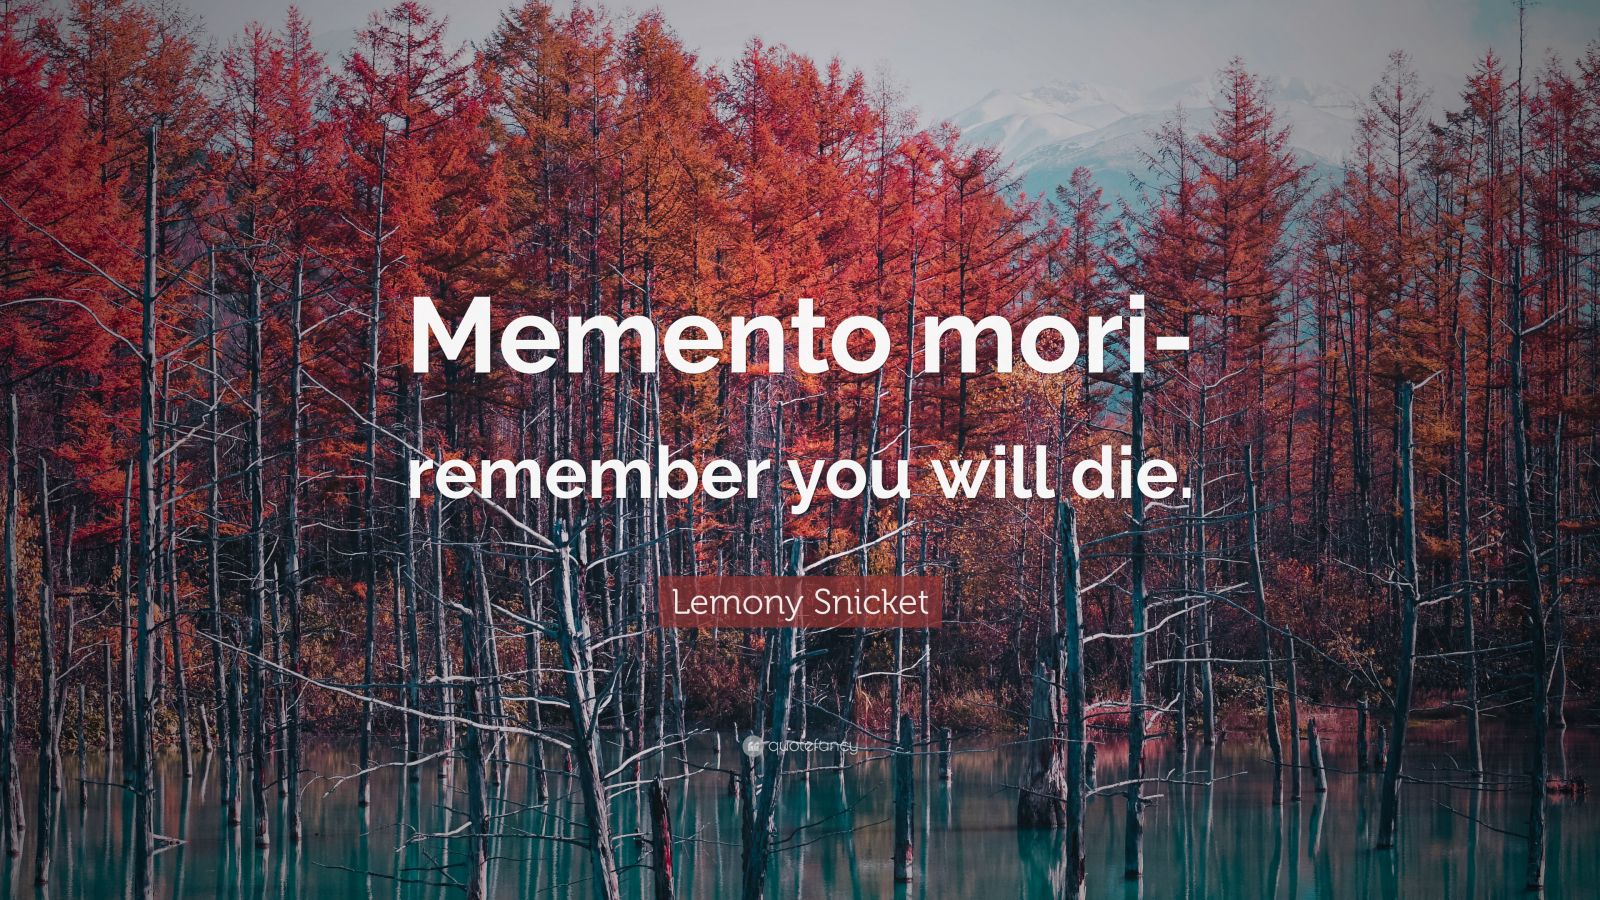 Lemony Snicket Quote: “Memento mori- remember you will die.”